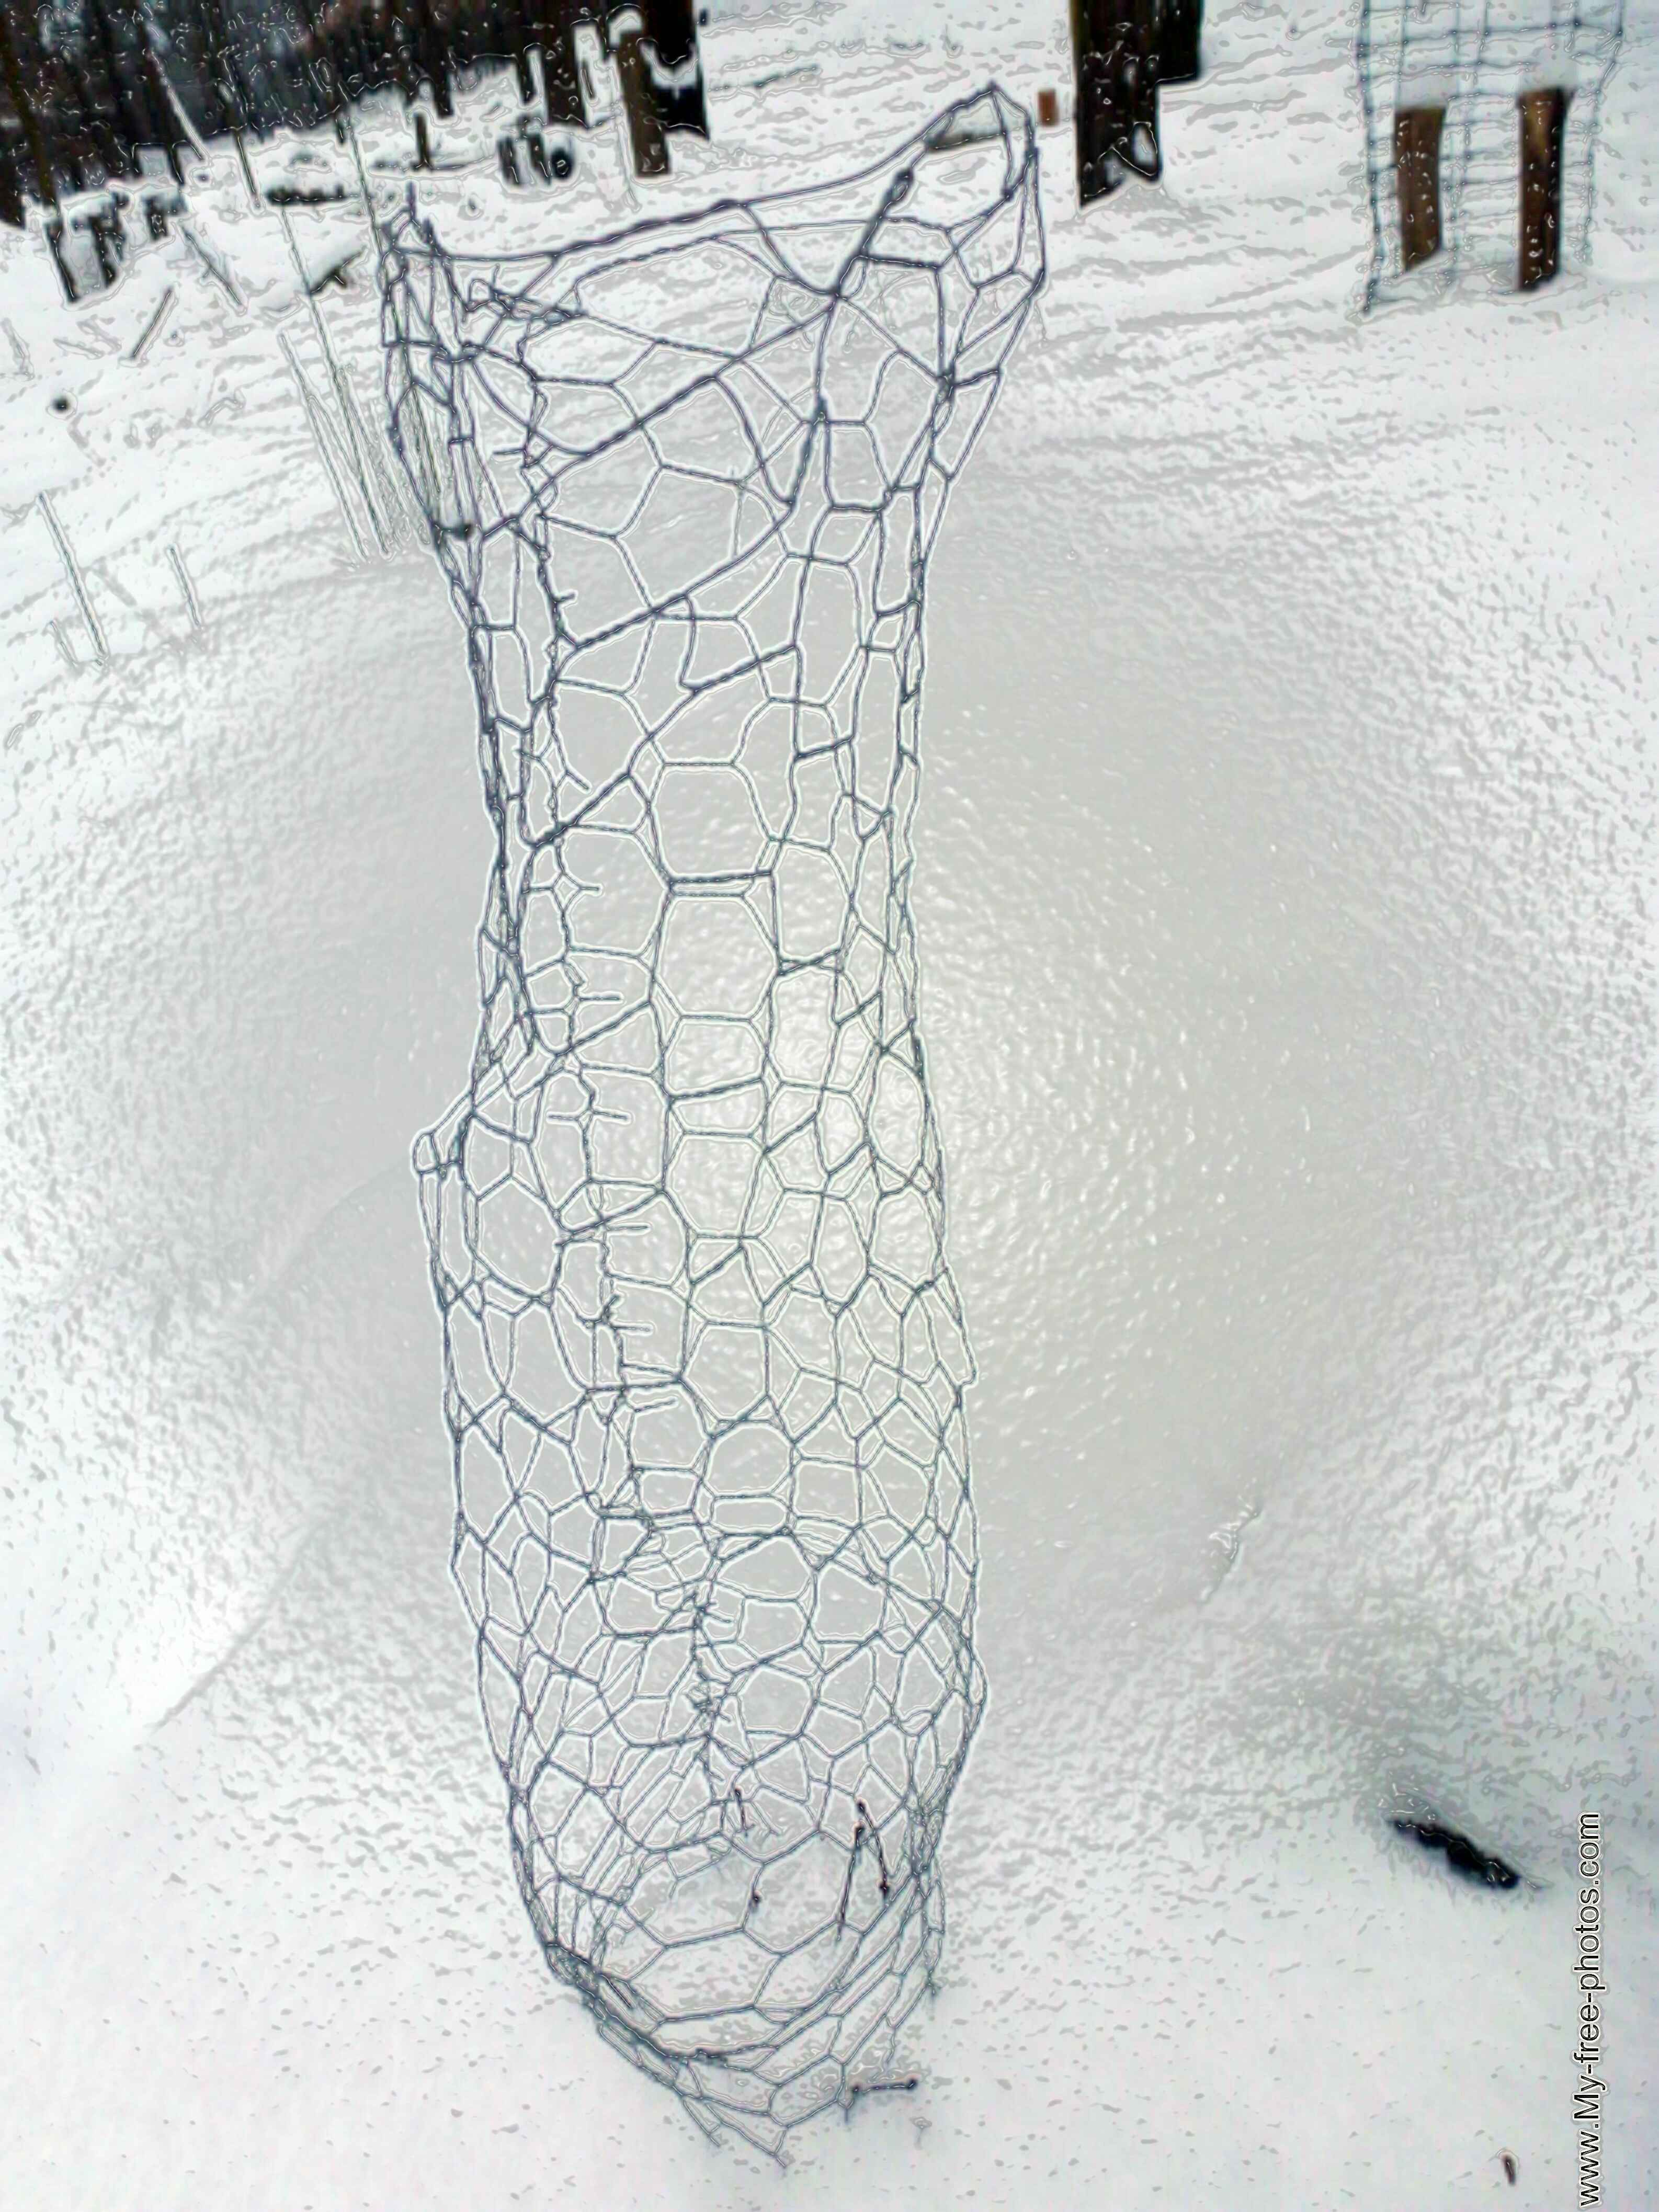 a big vase in the snow